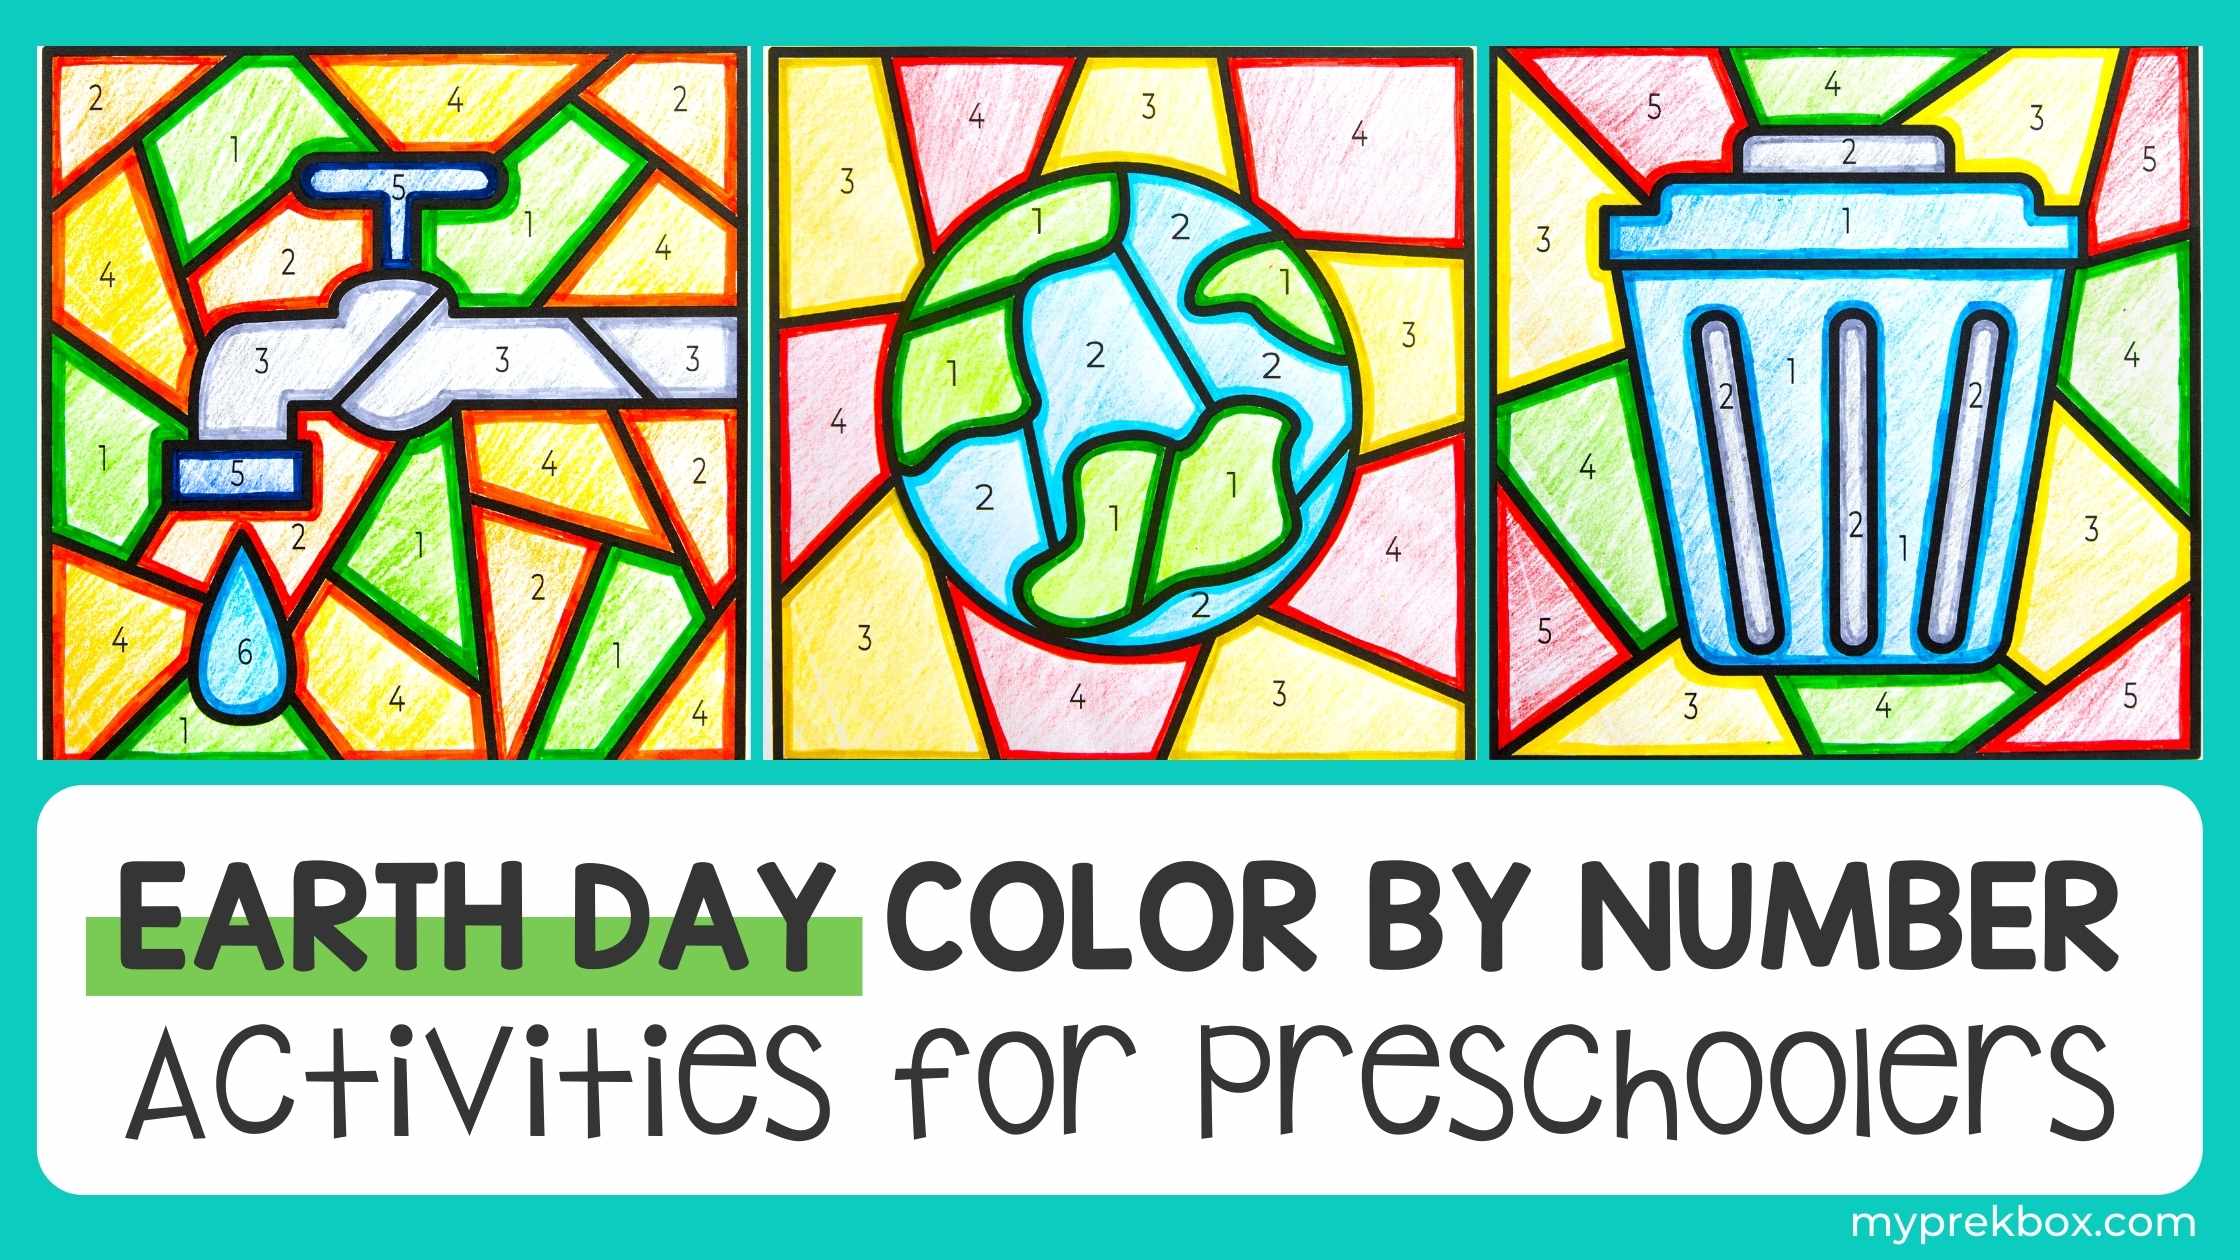 Earth Day Color by Number Activities for Preschoolers